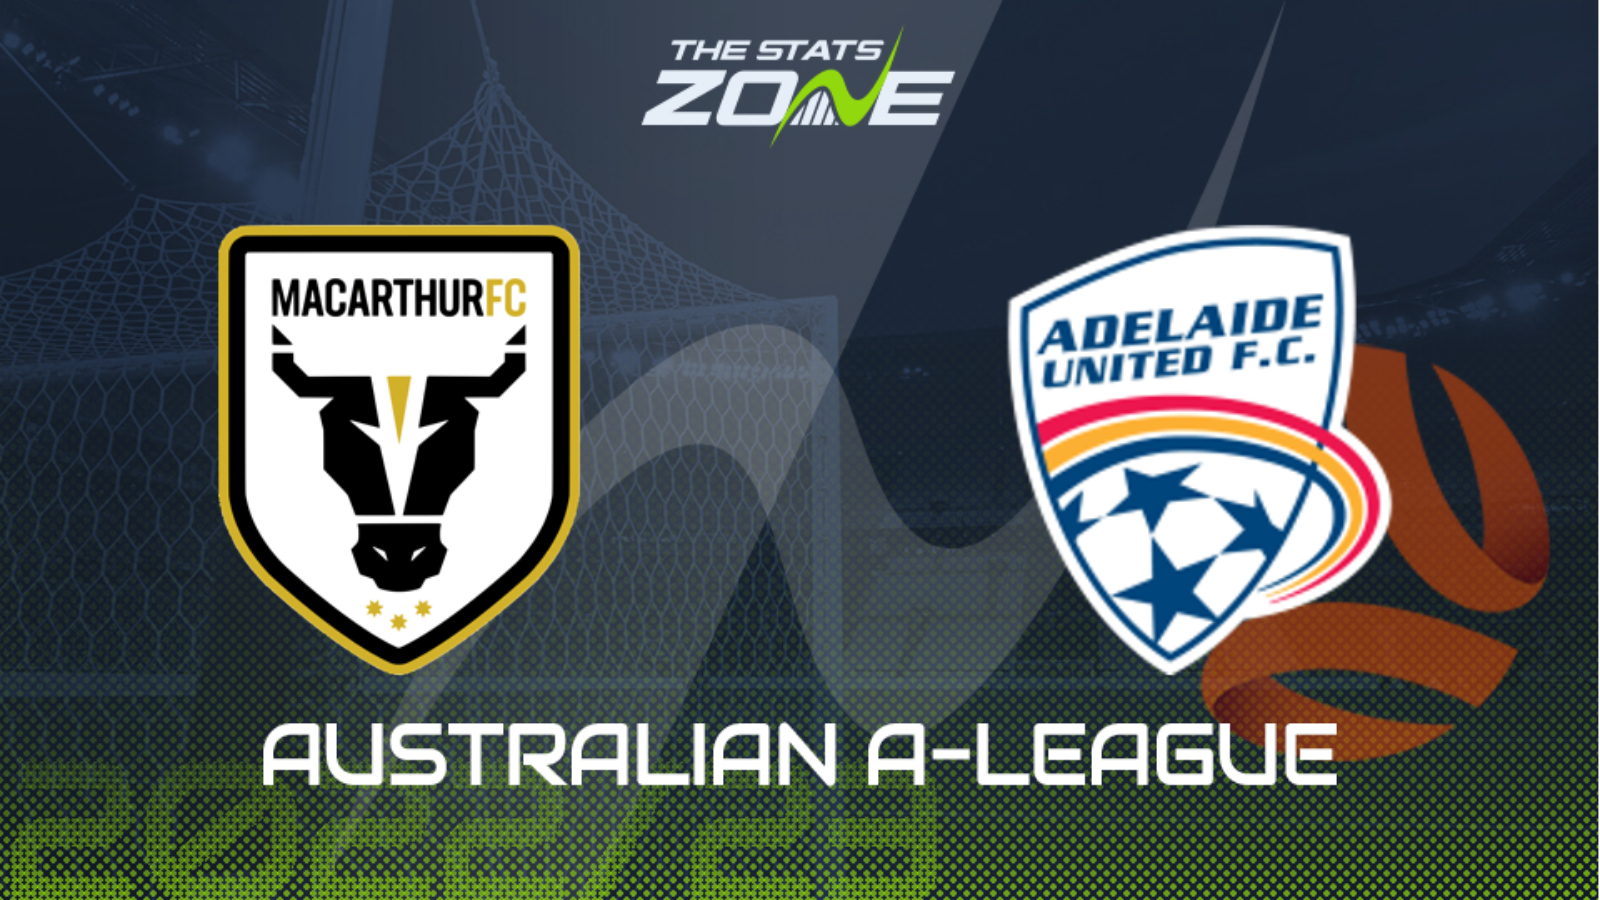 Macarthur vs Adelaide United League Stage Preview Prediction